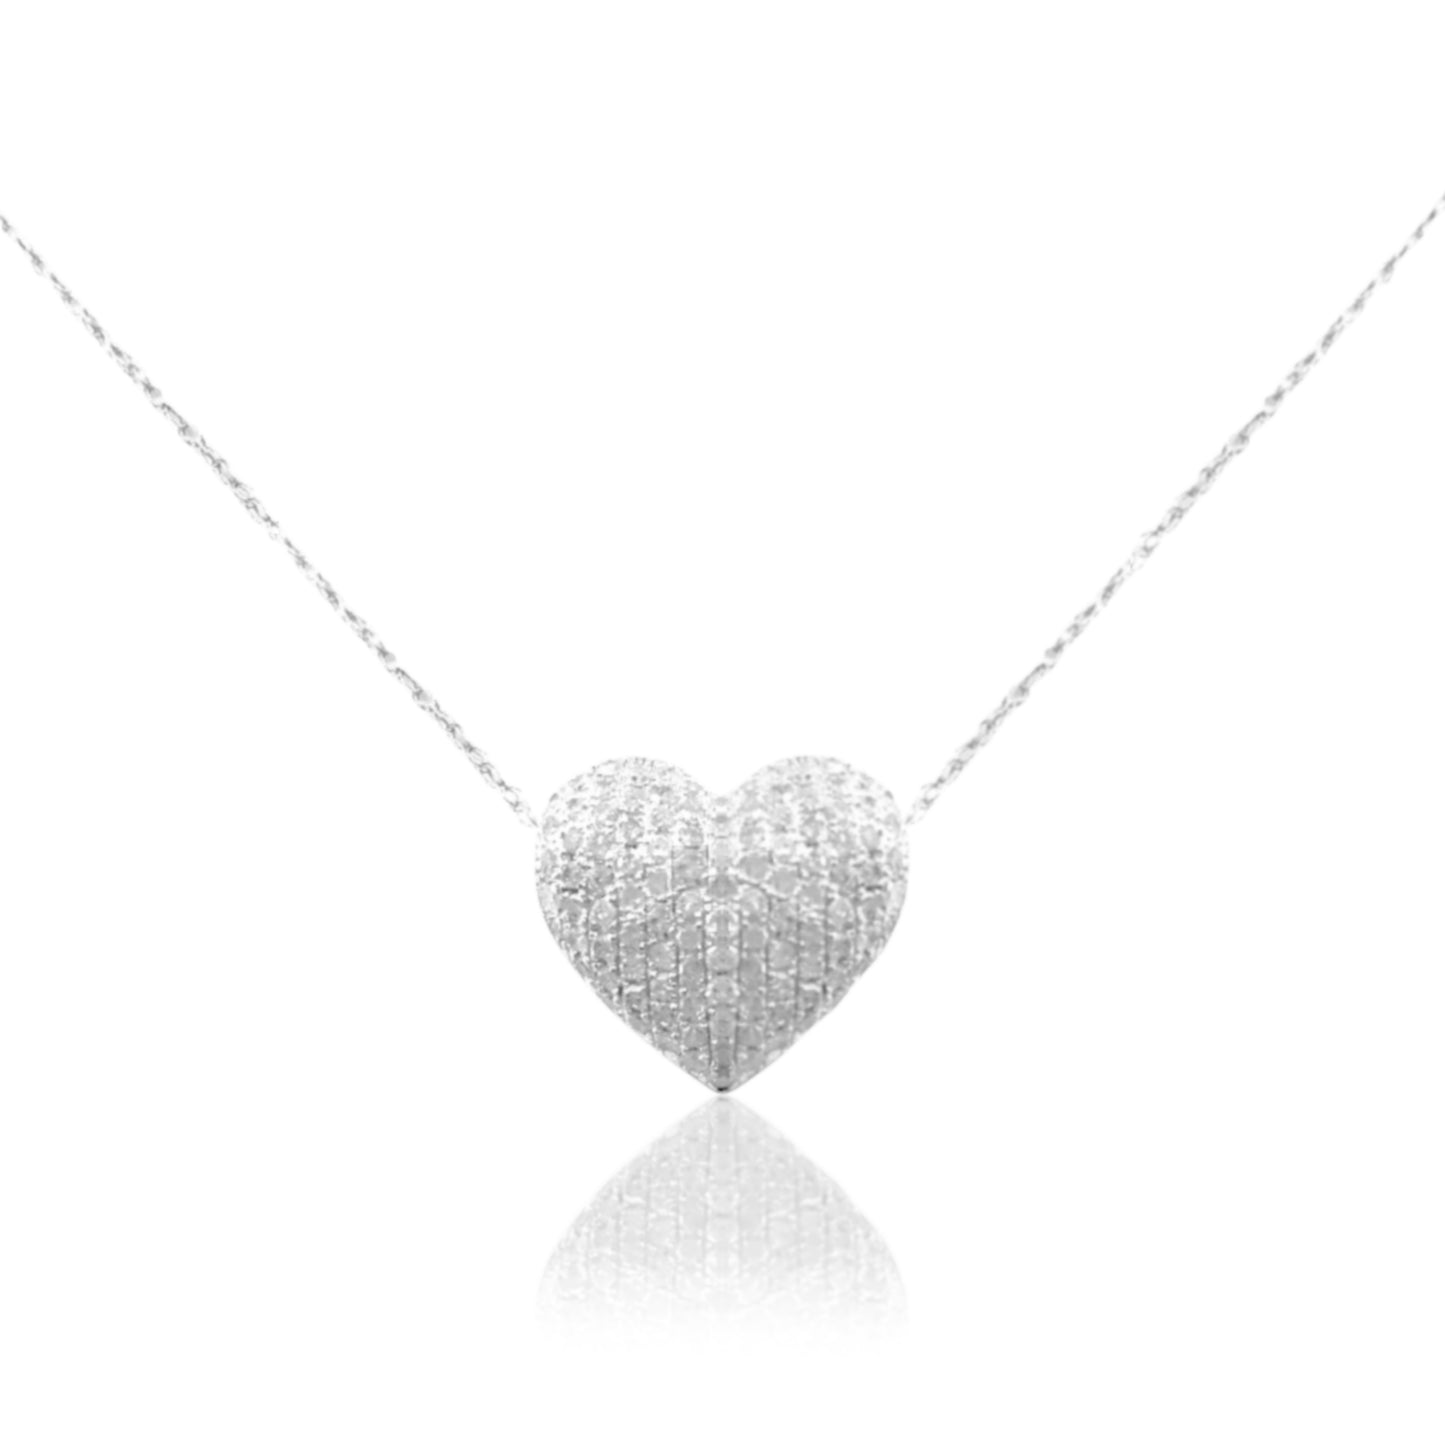 14K White Gold and Diamond Heart Pendant Necklace - HK Jewels